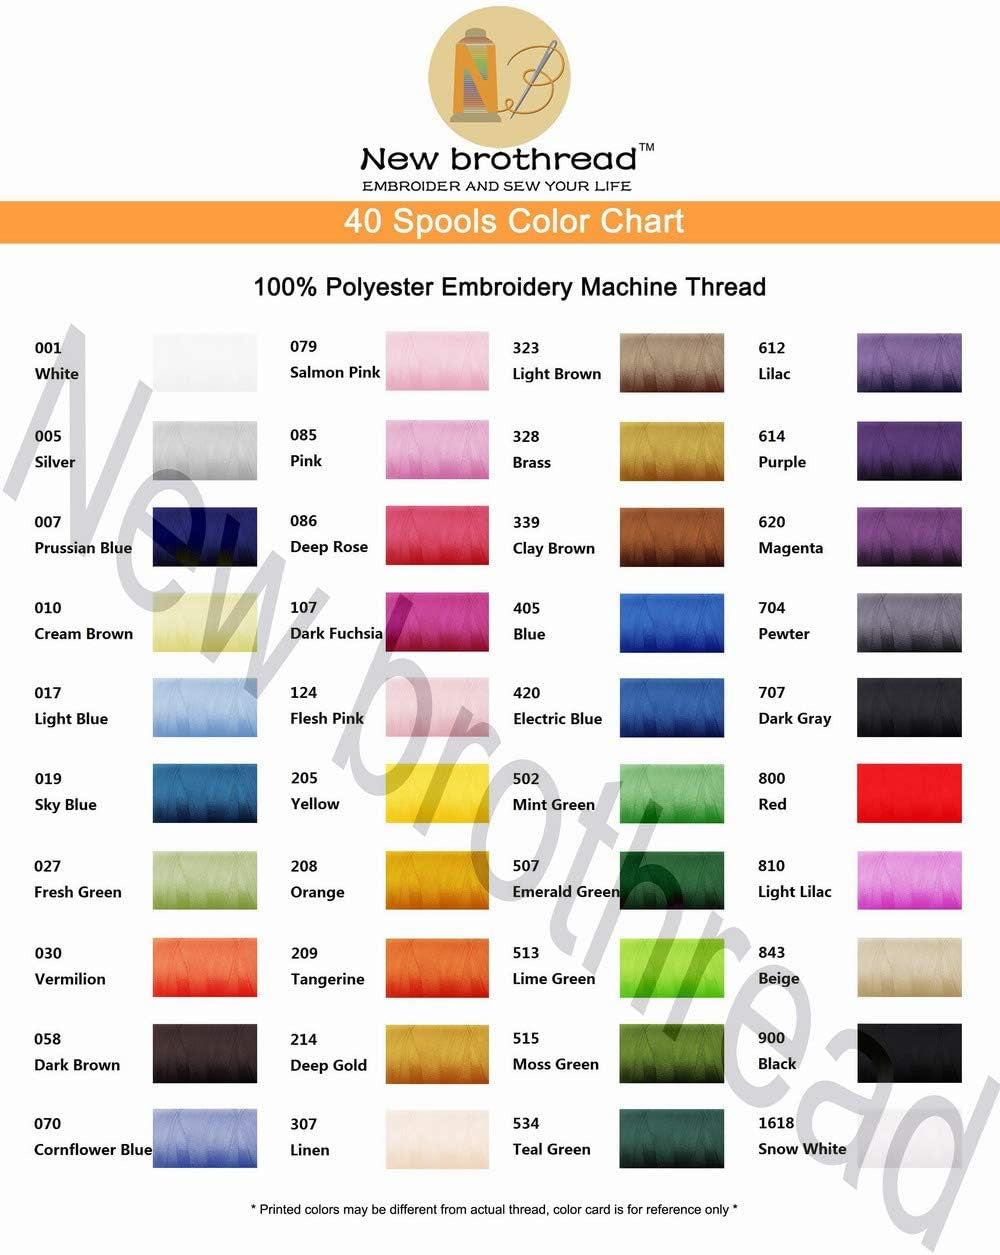 40 Brother Colors Polyester Embroidery Machine Thread Kit 500M (550Y) Each Spool for Brother Babylock Janome Singer Pfaff Husqvarna Bernina Sewing Machines